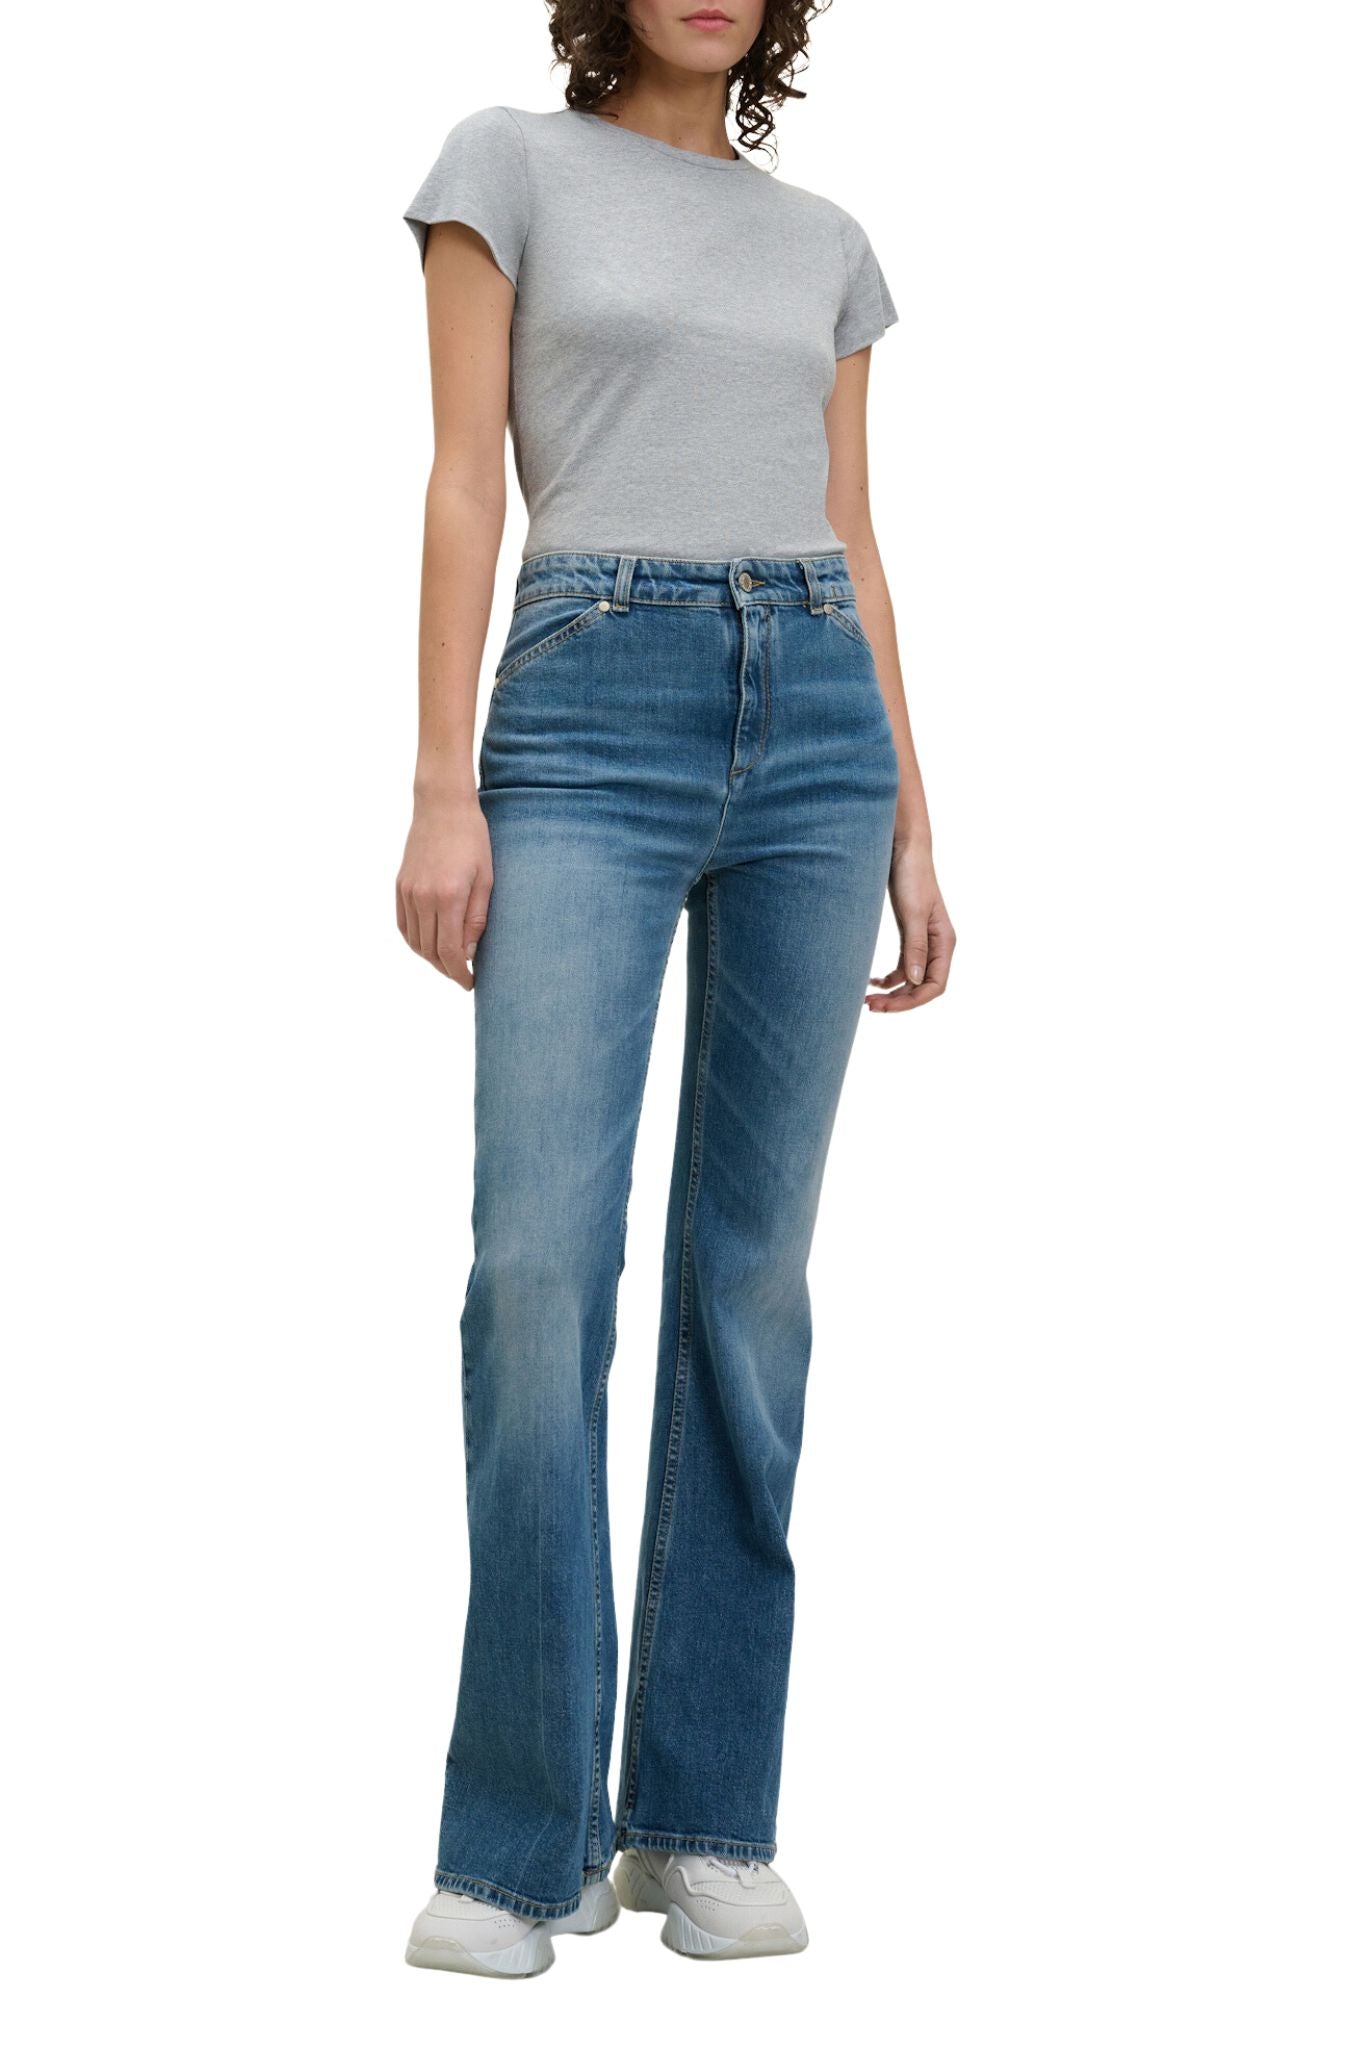 Dorothee Schumacher All Time Favorites O-Neck Tee